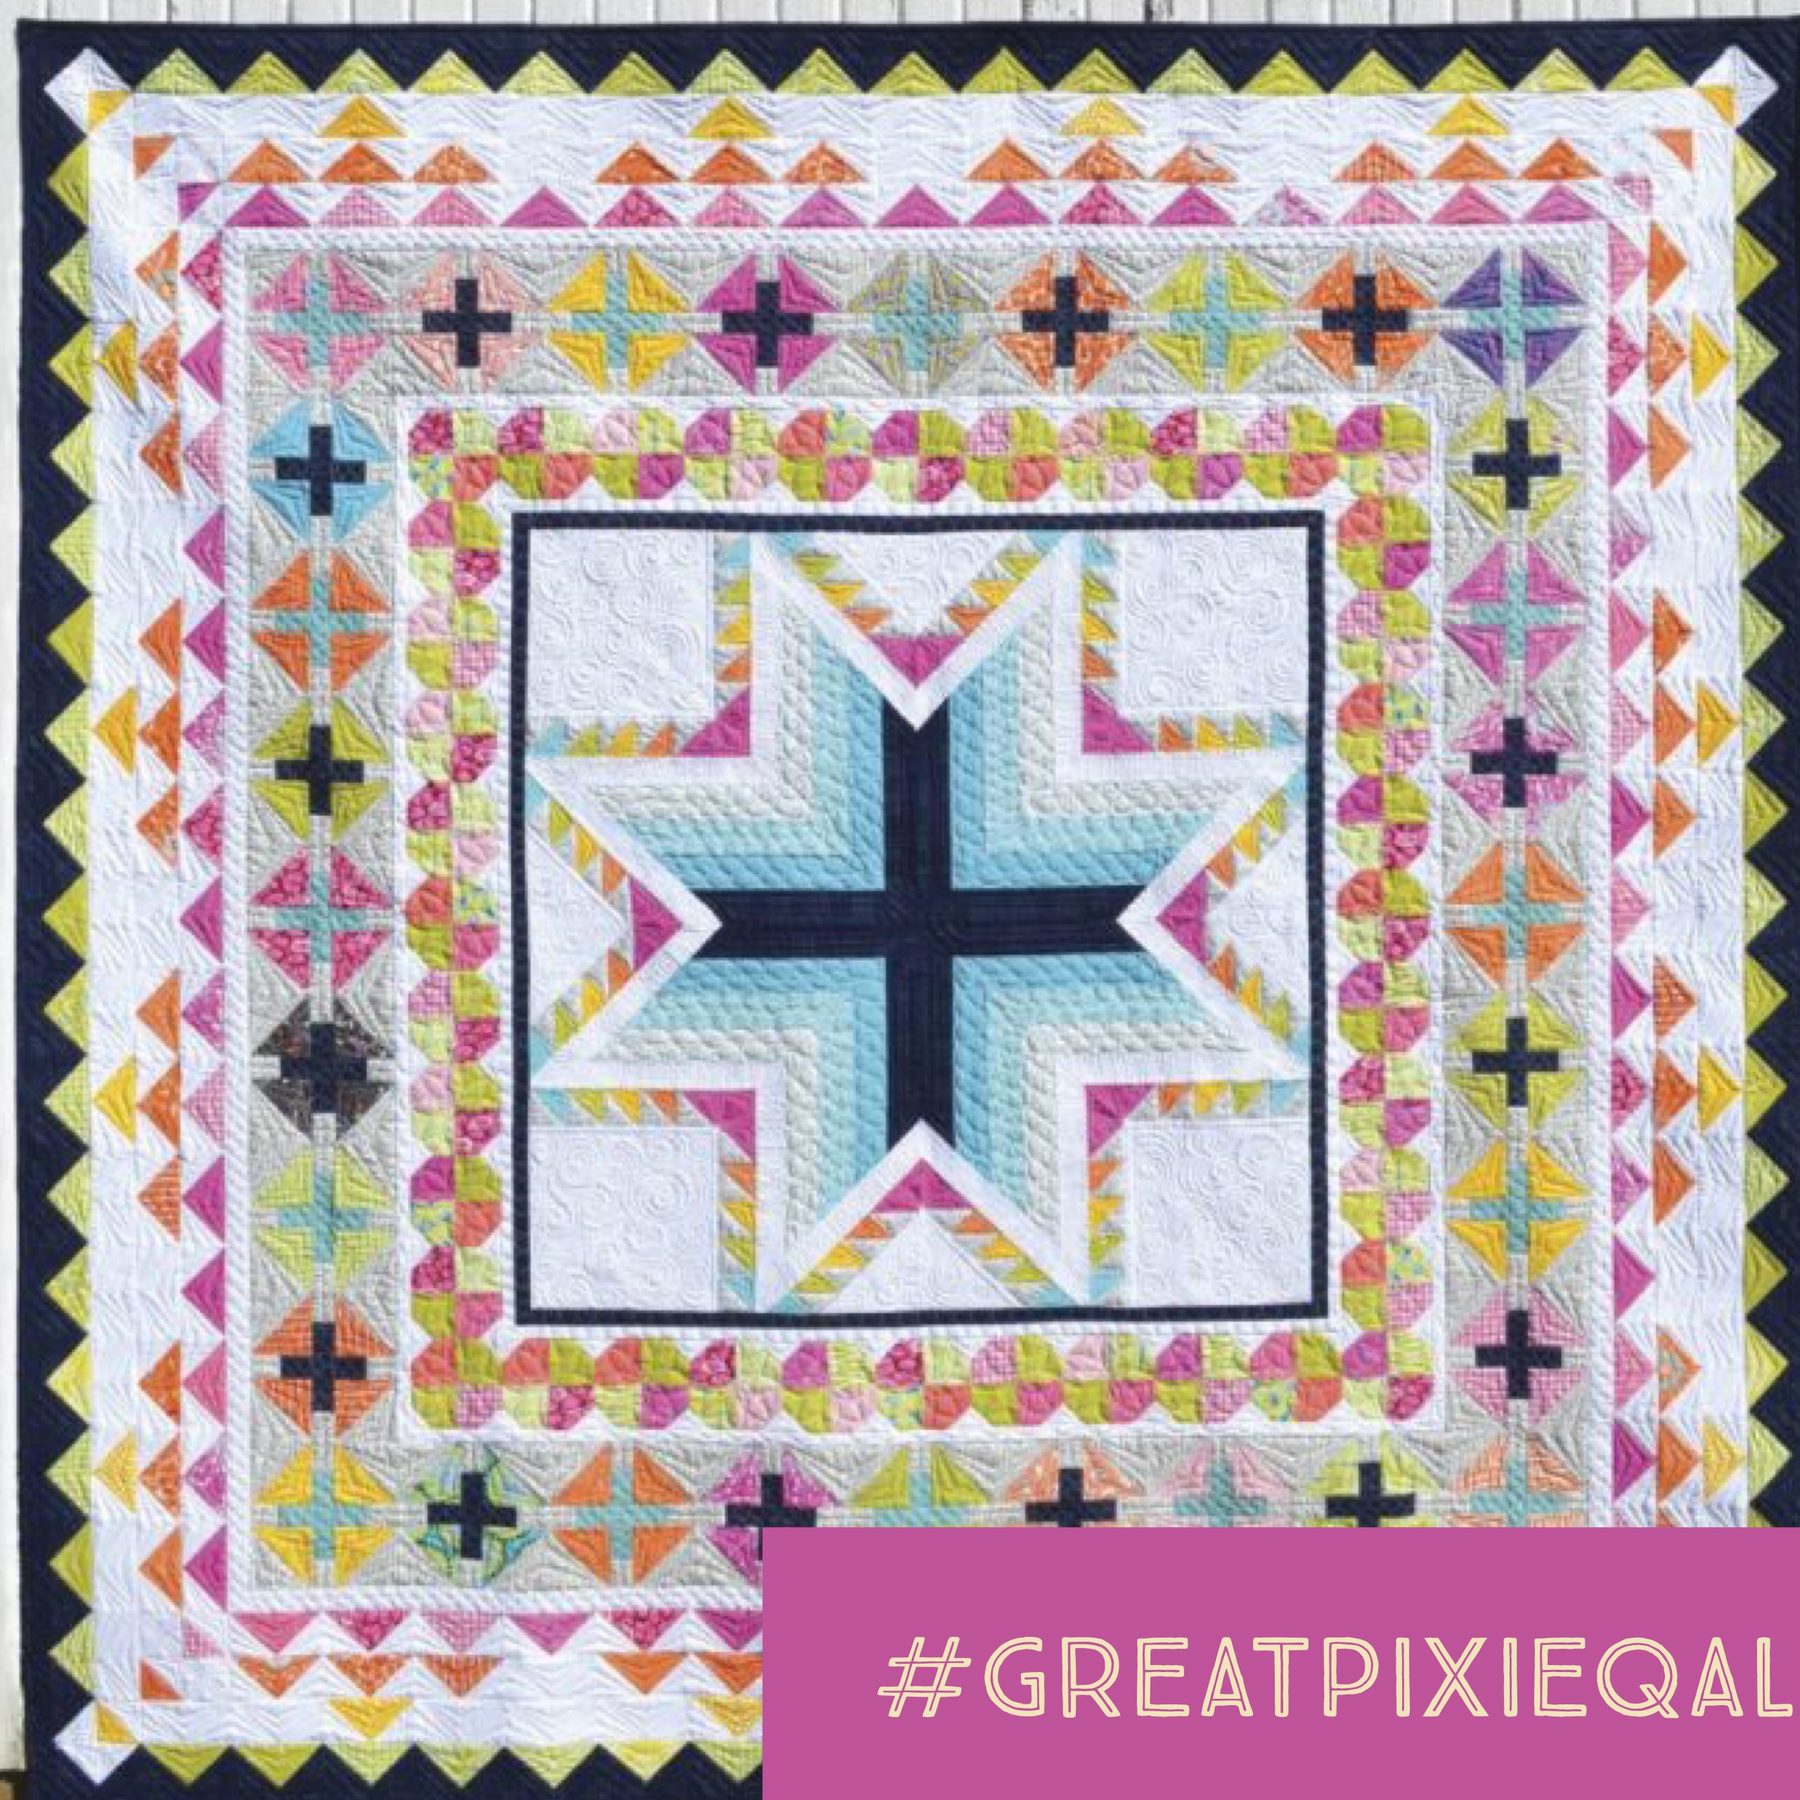 Great Pixie Quilt-along - everything you need to know